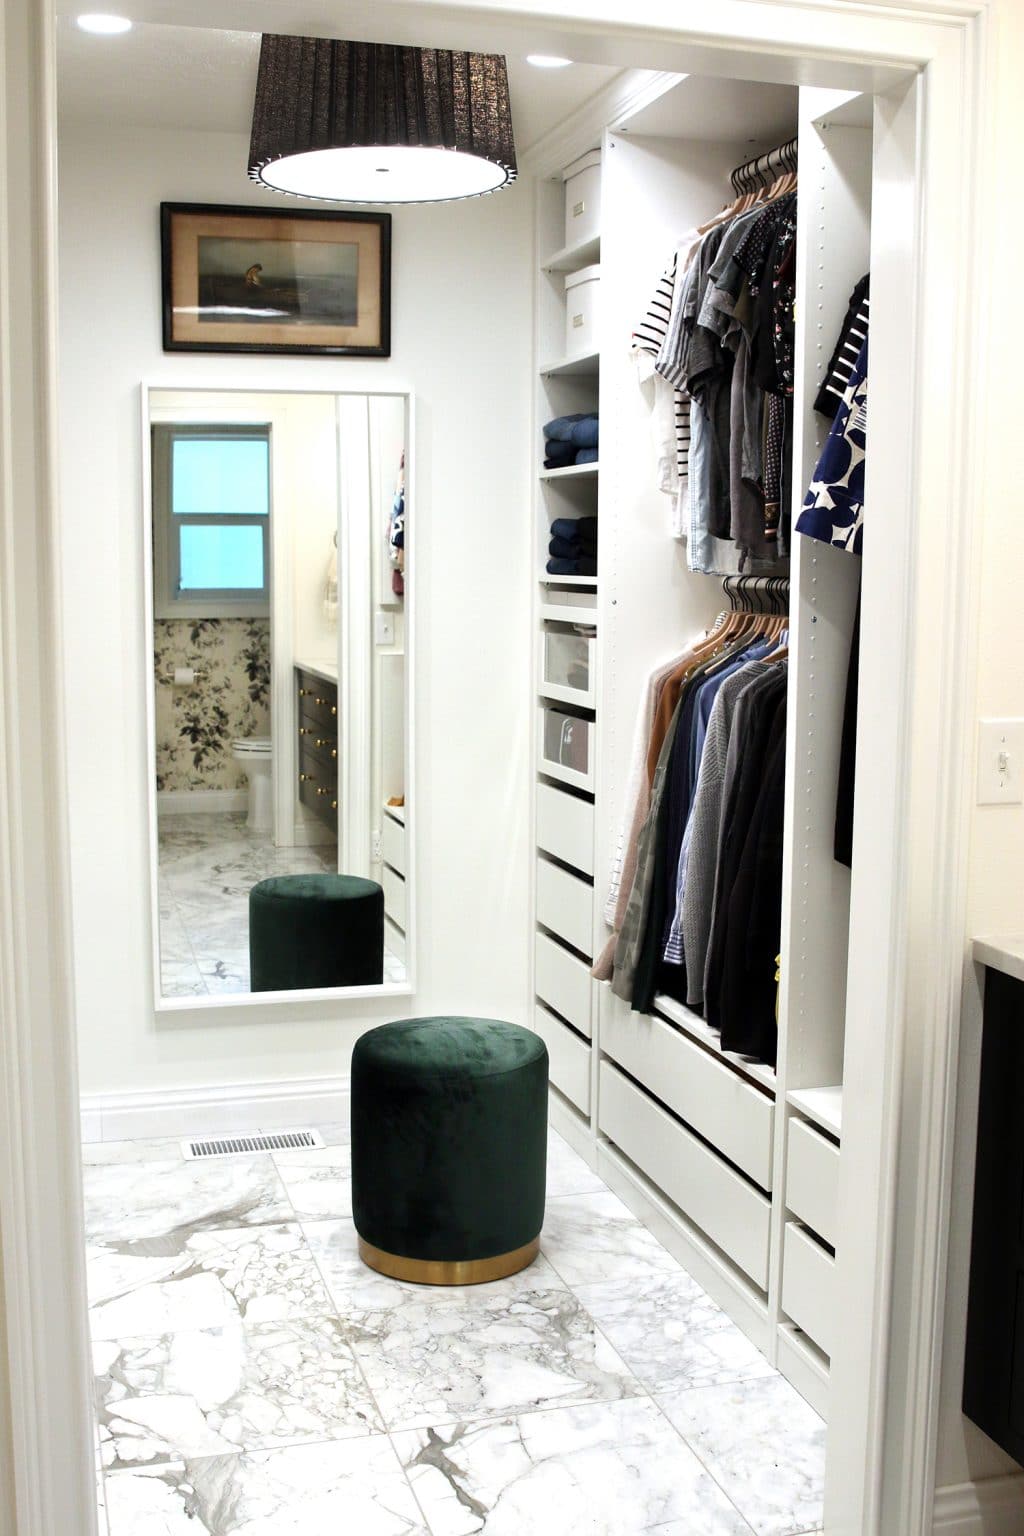 Before and After: Our Closet and Ikea PAX Wardrobes That Made it - Chris Loves Julia